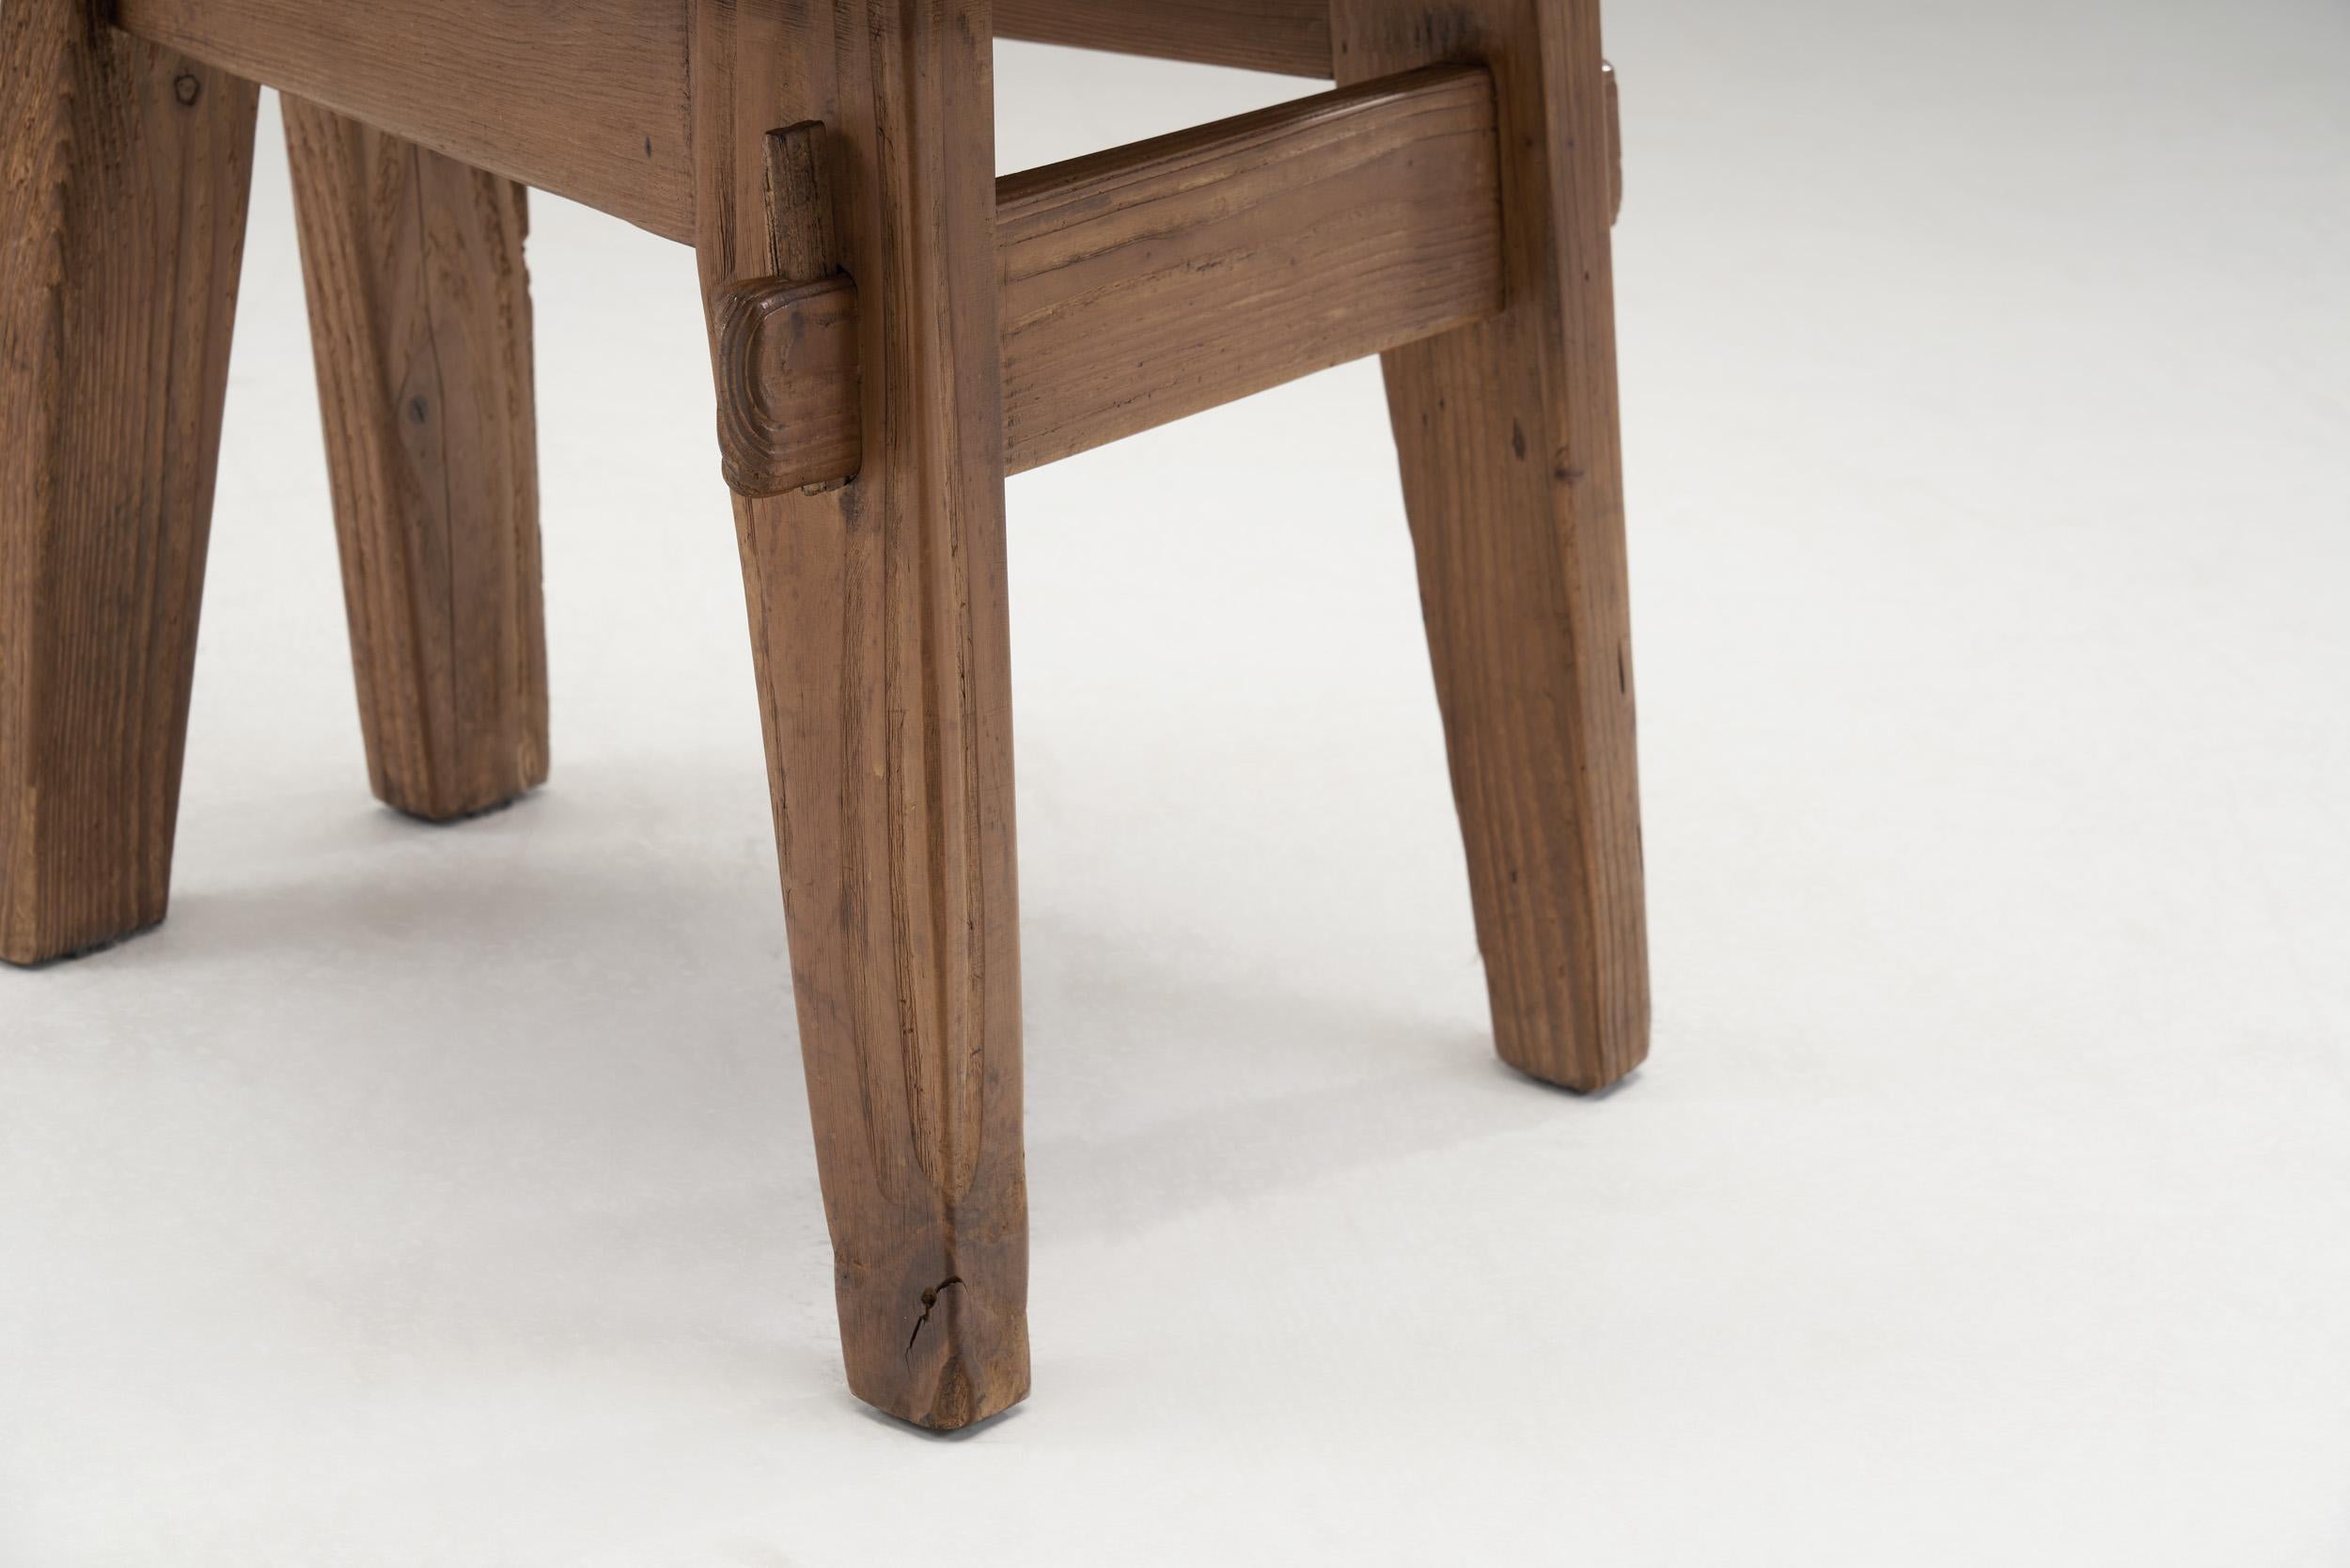 Solid Wood Brutalist Chairs with Mortise and Tenon Joinery, Europe, circa 1960s 11